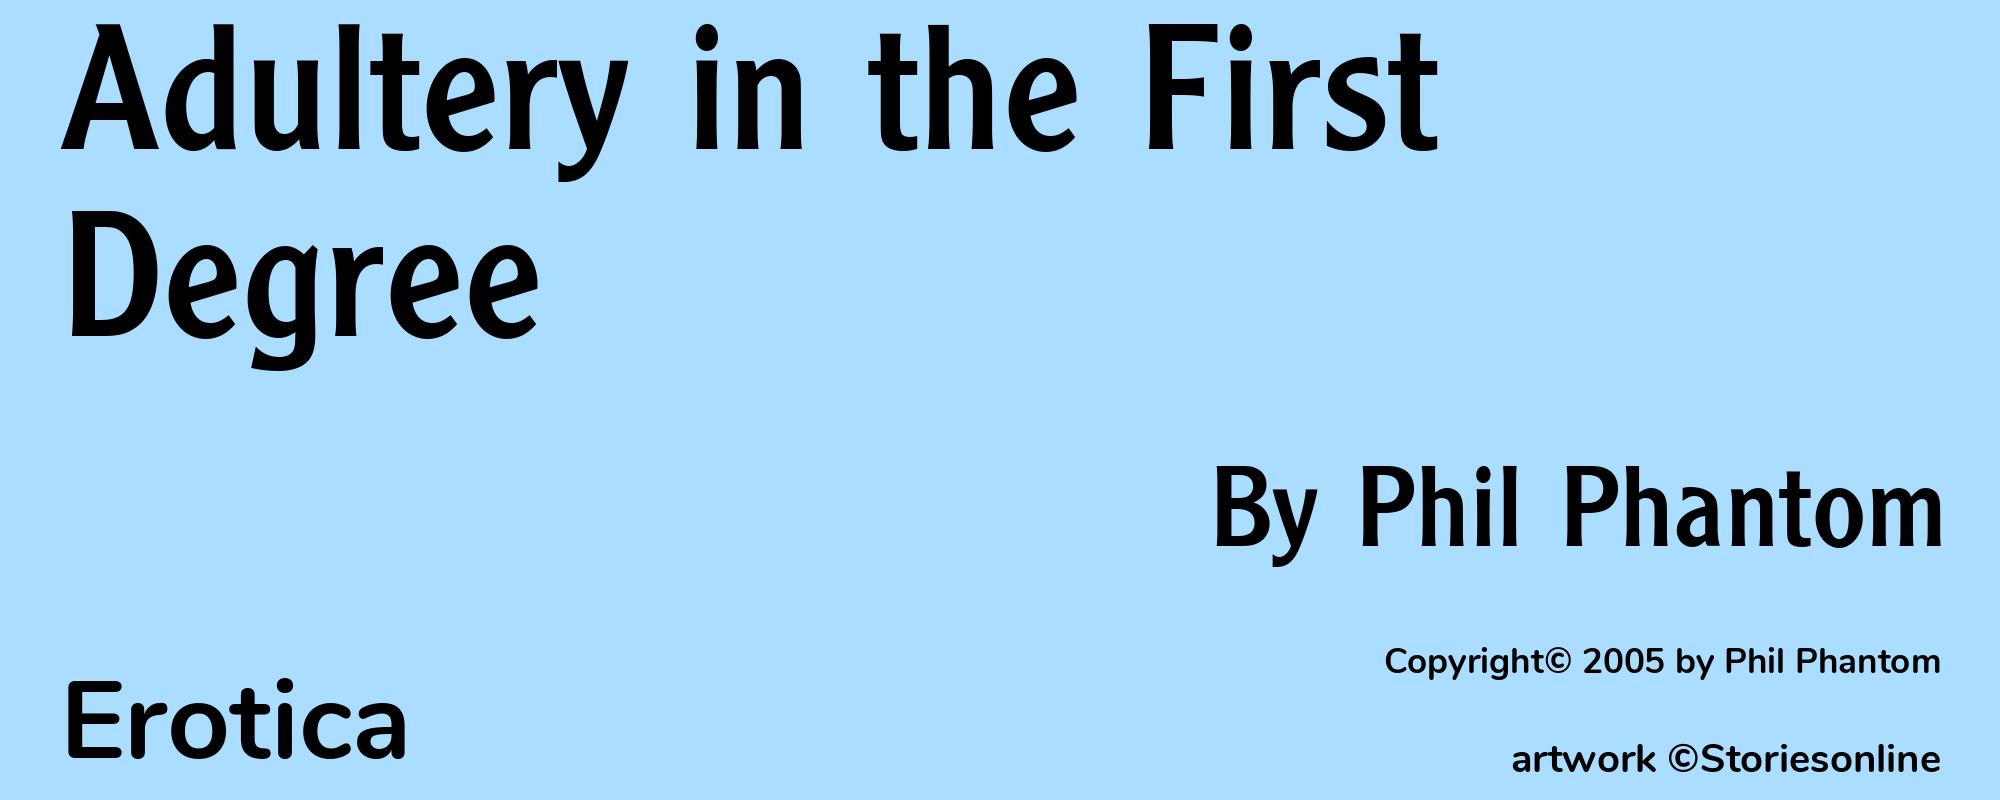 Adultery in the First Degree - Cover